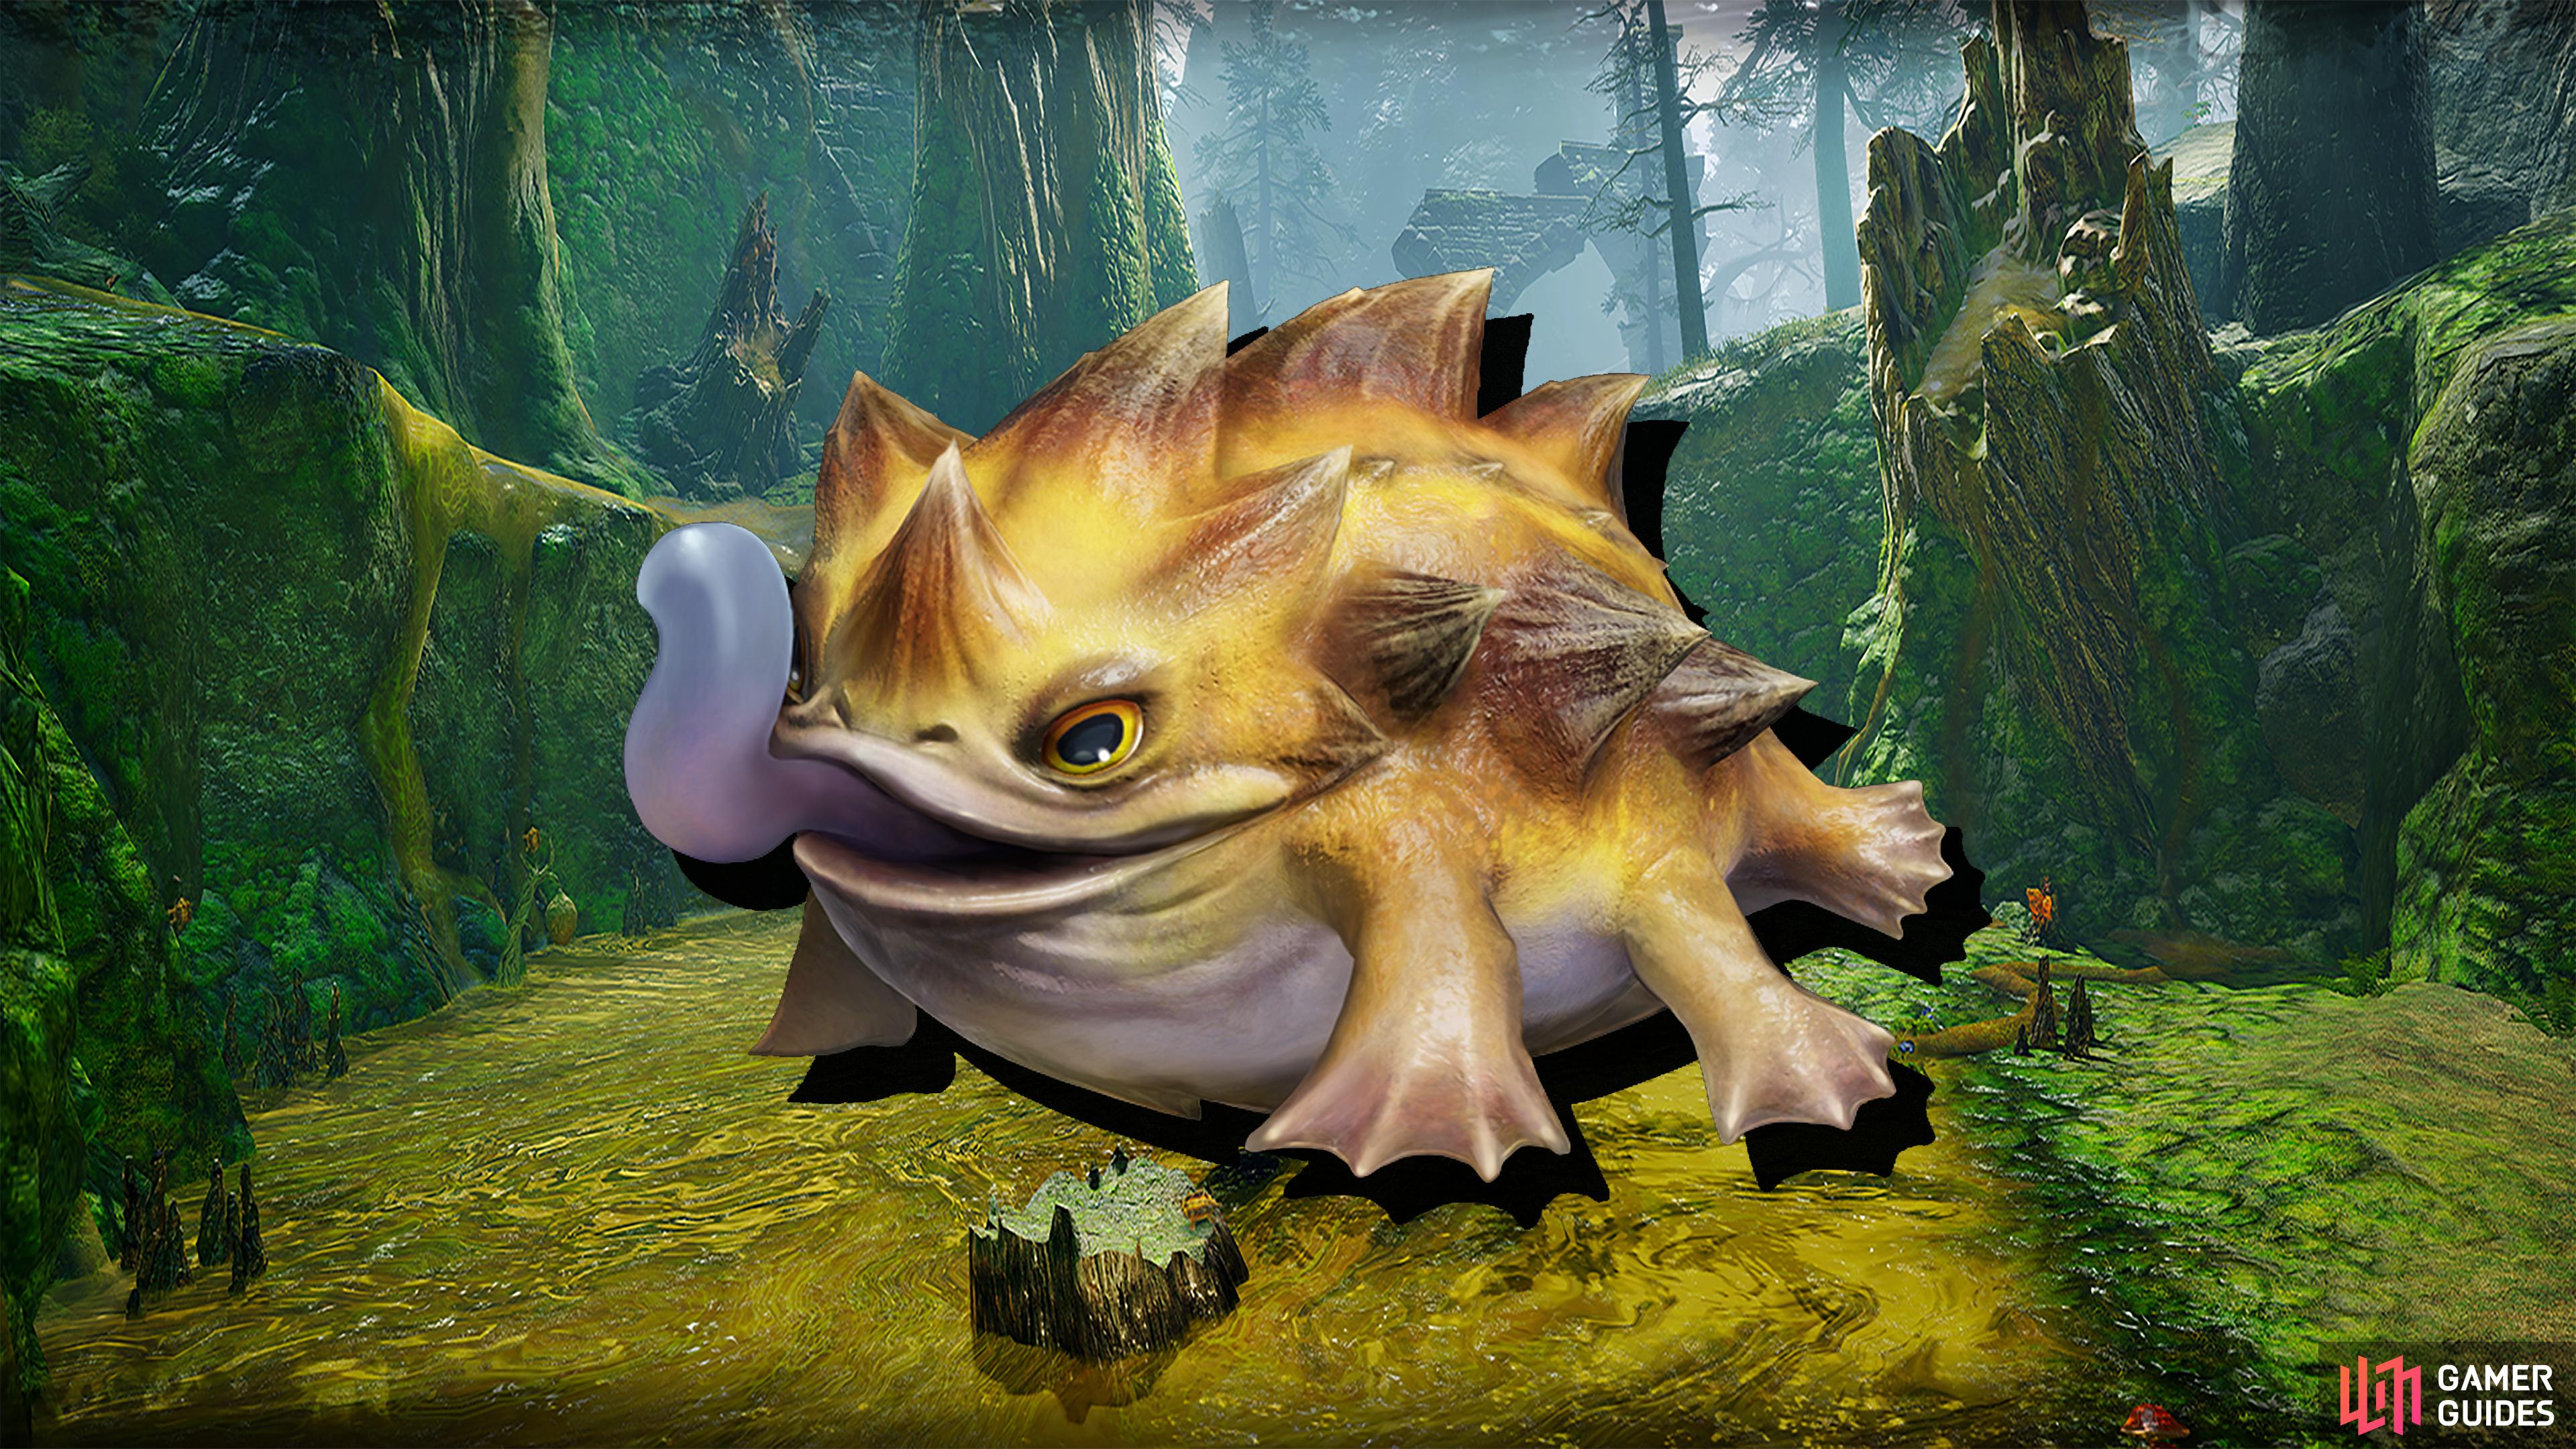 The Thornytoad is a new Endemic Life in Monster Hunter Rise: Sunbreak.